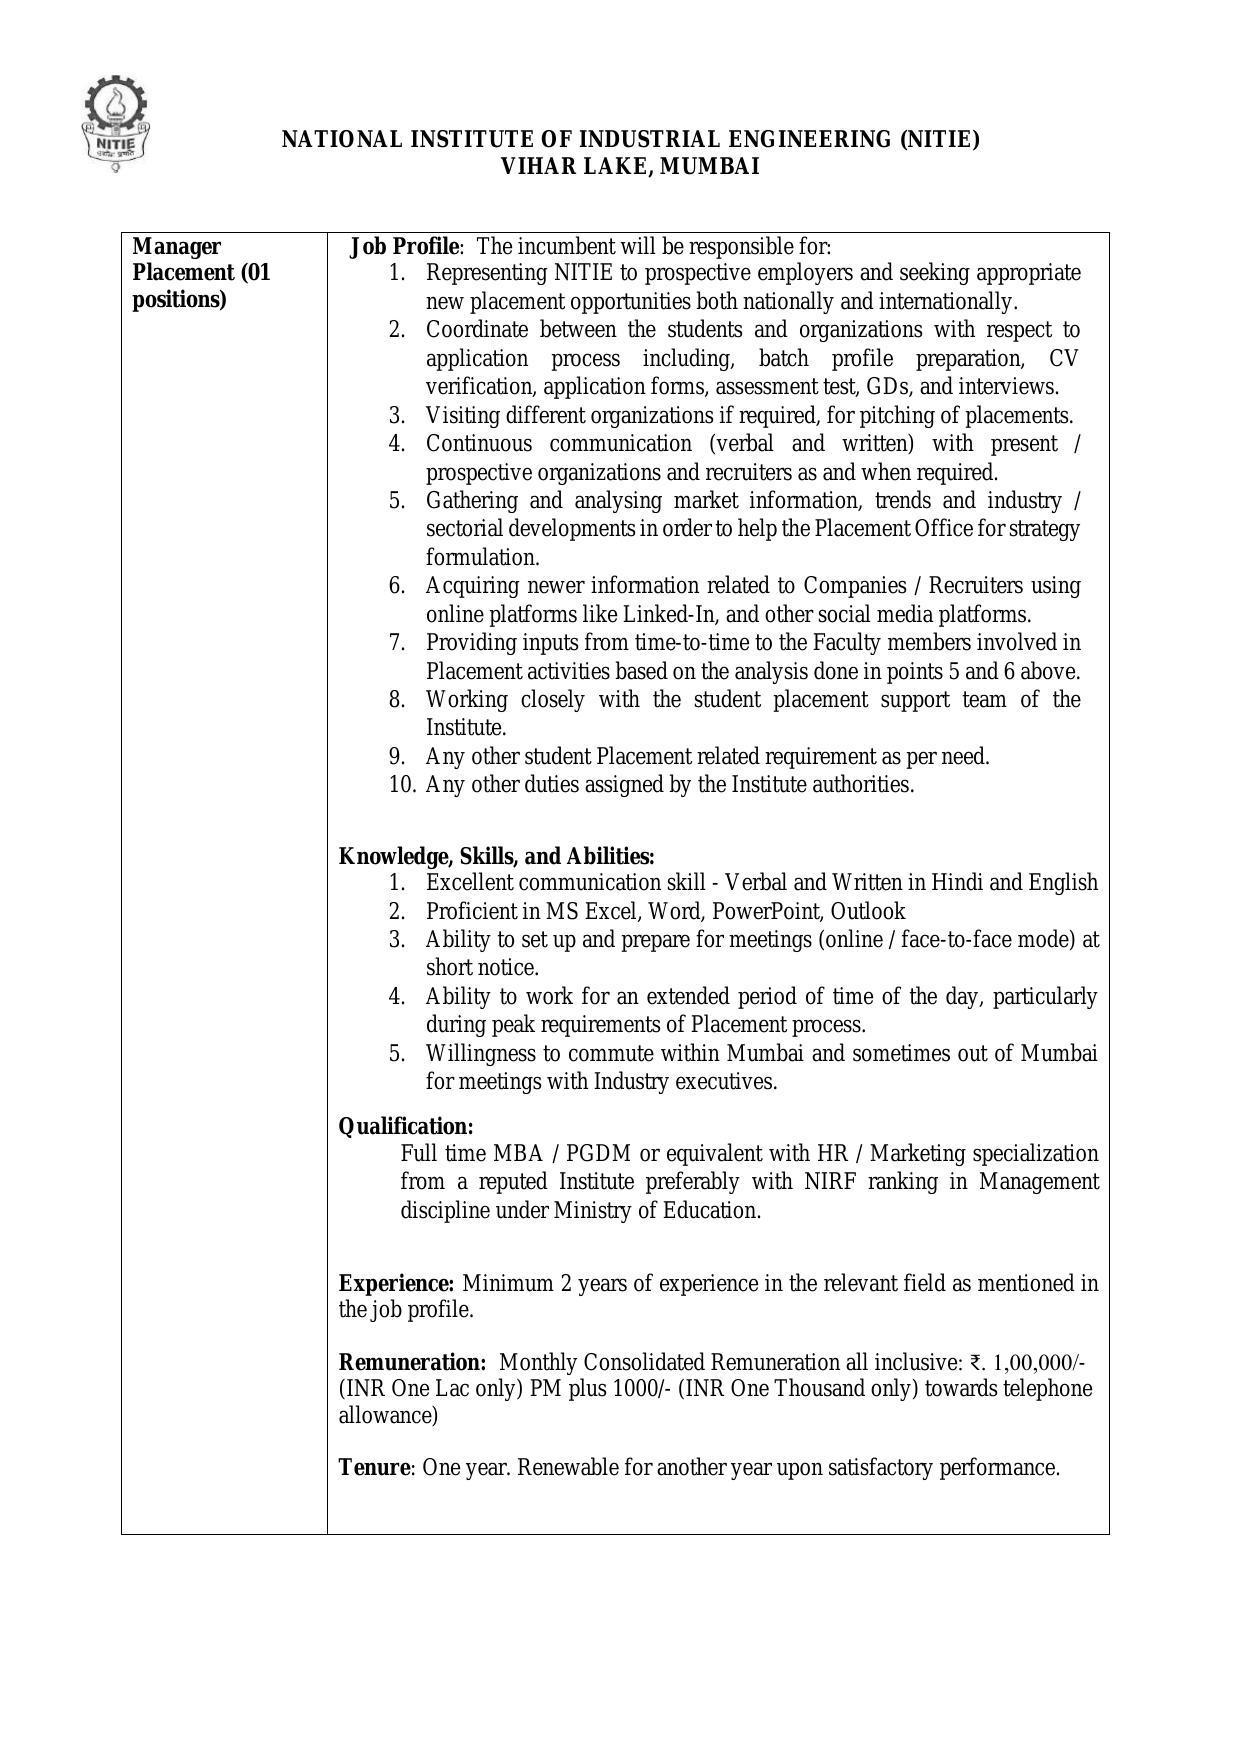 National Institute of Industrial Engineering (NITIE) Invites Application for Manager Recruitment 2022 - Page 2